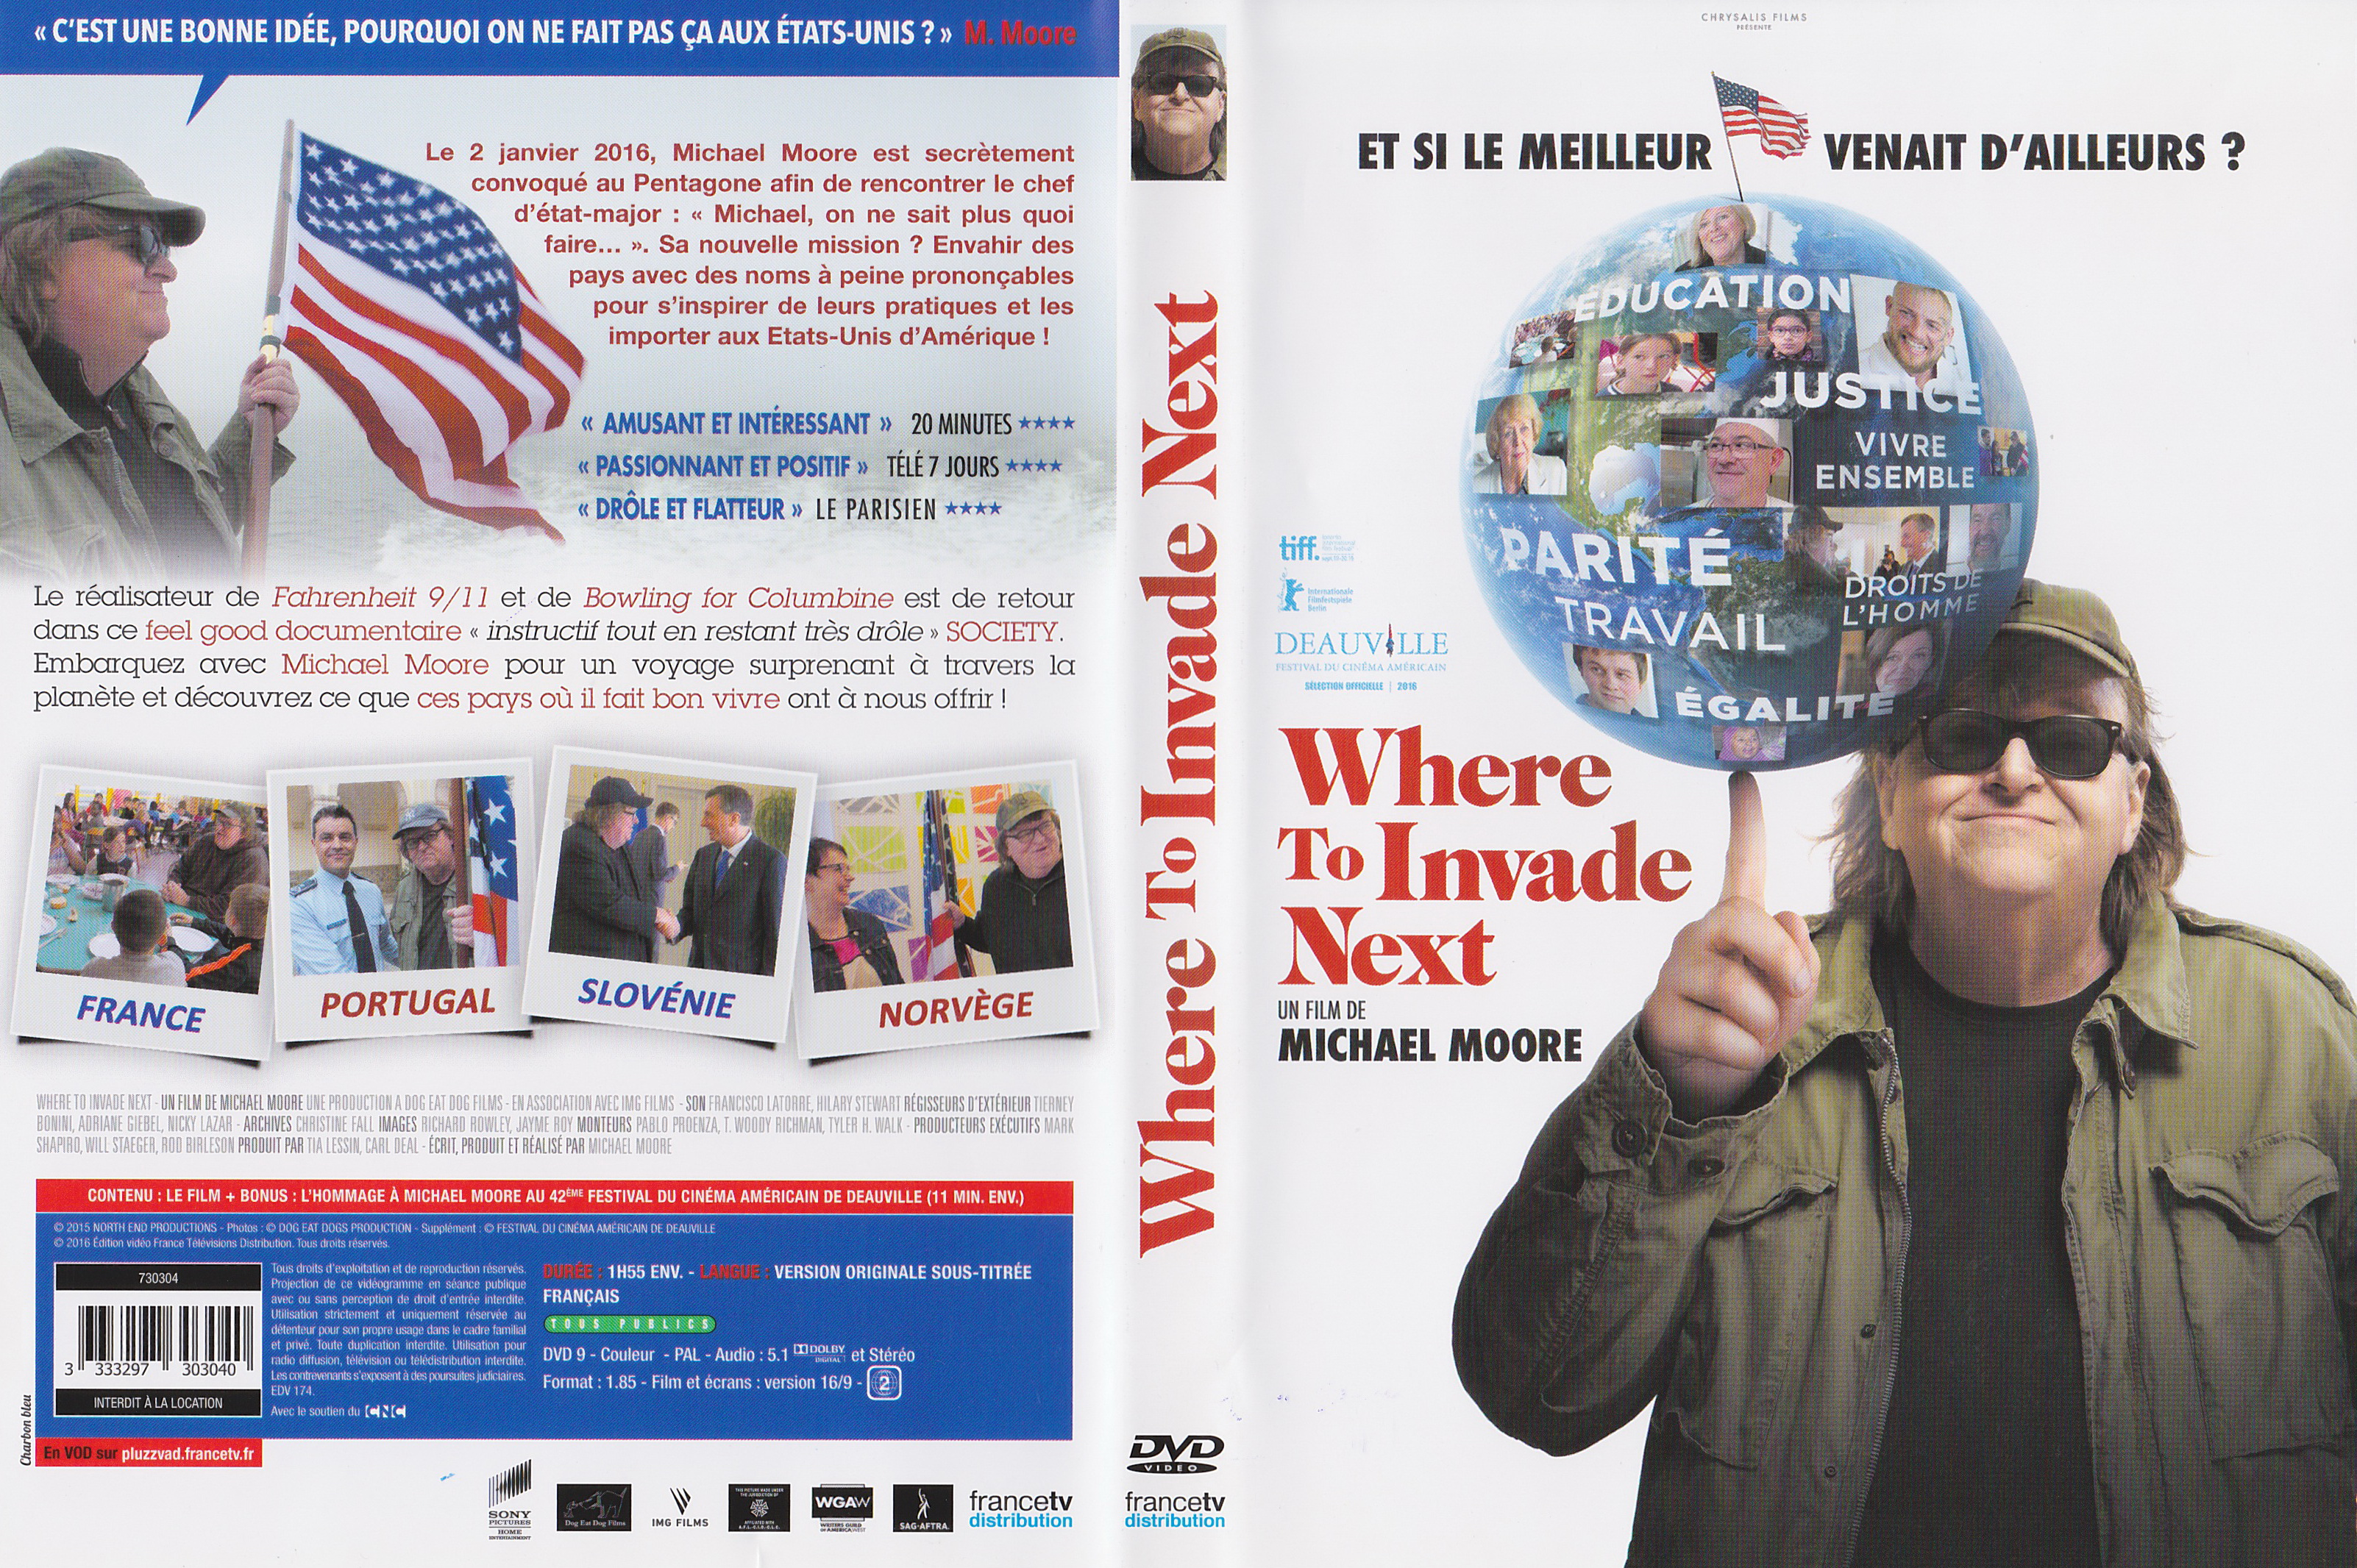 Jaquette DVD Where to invade next